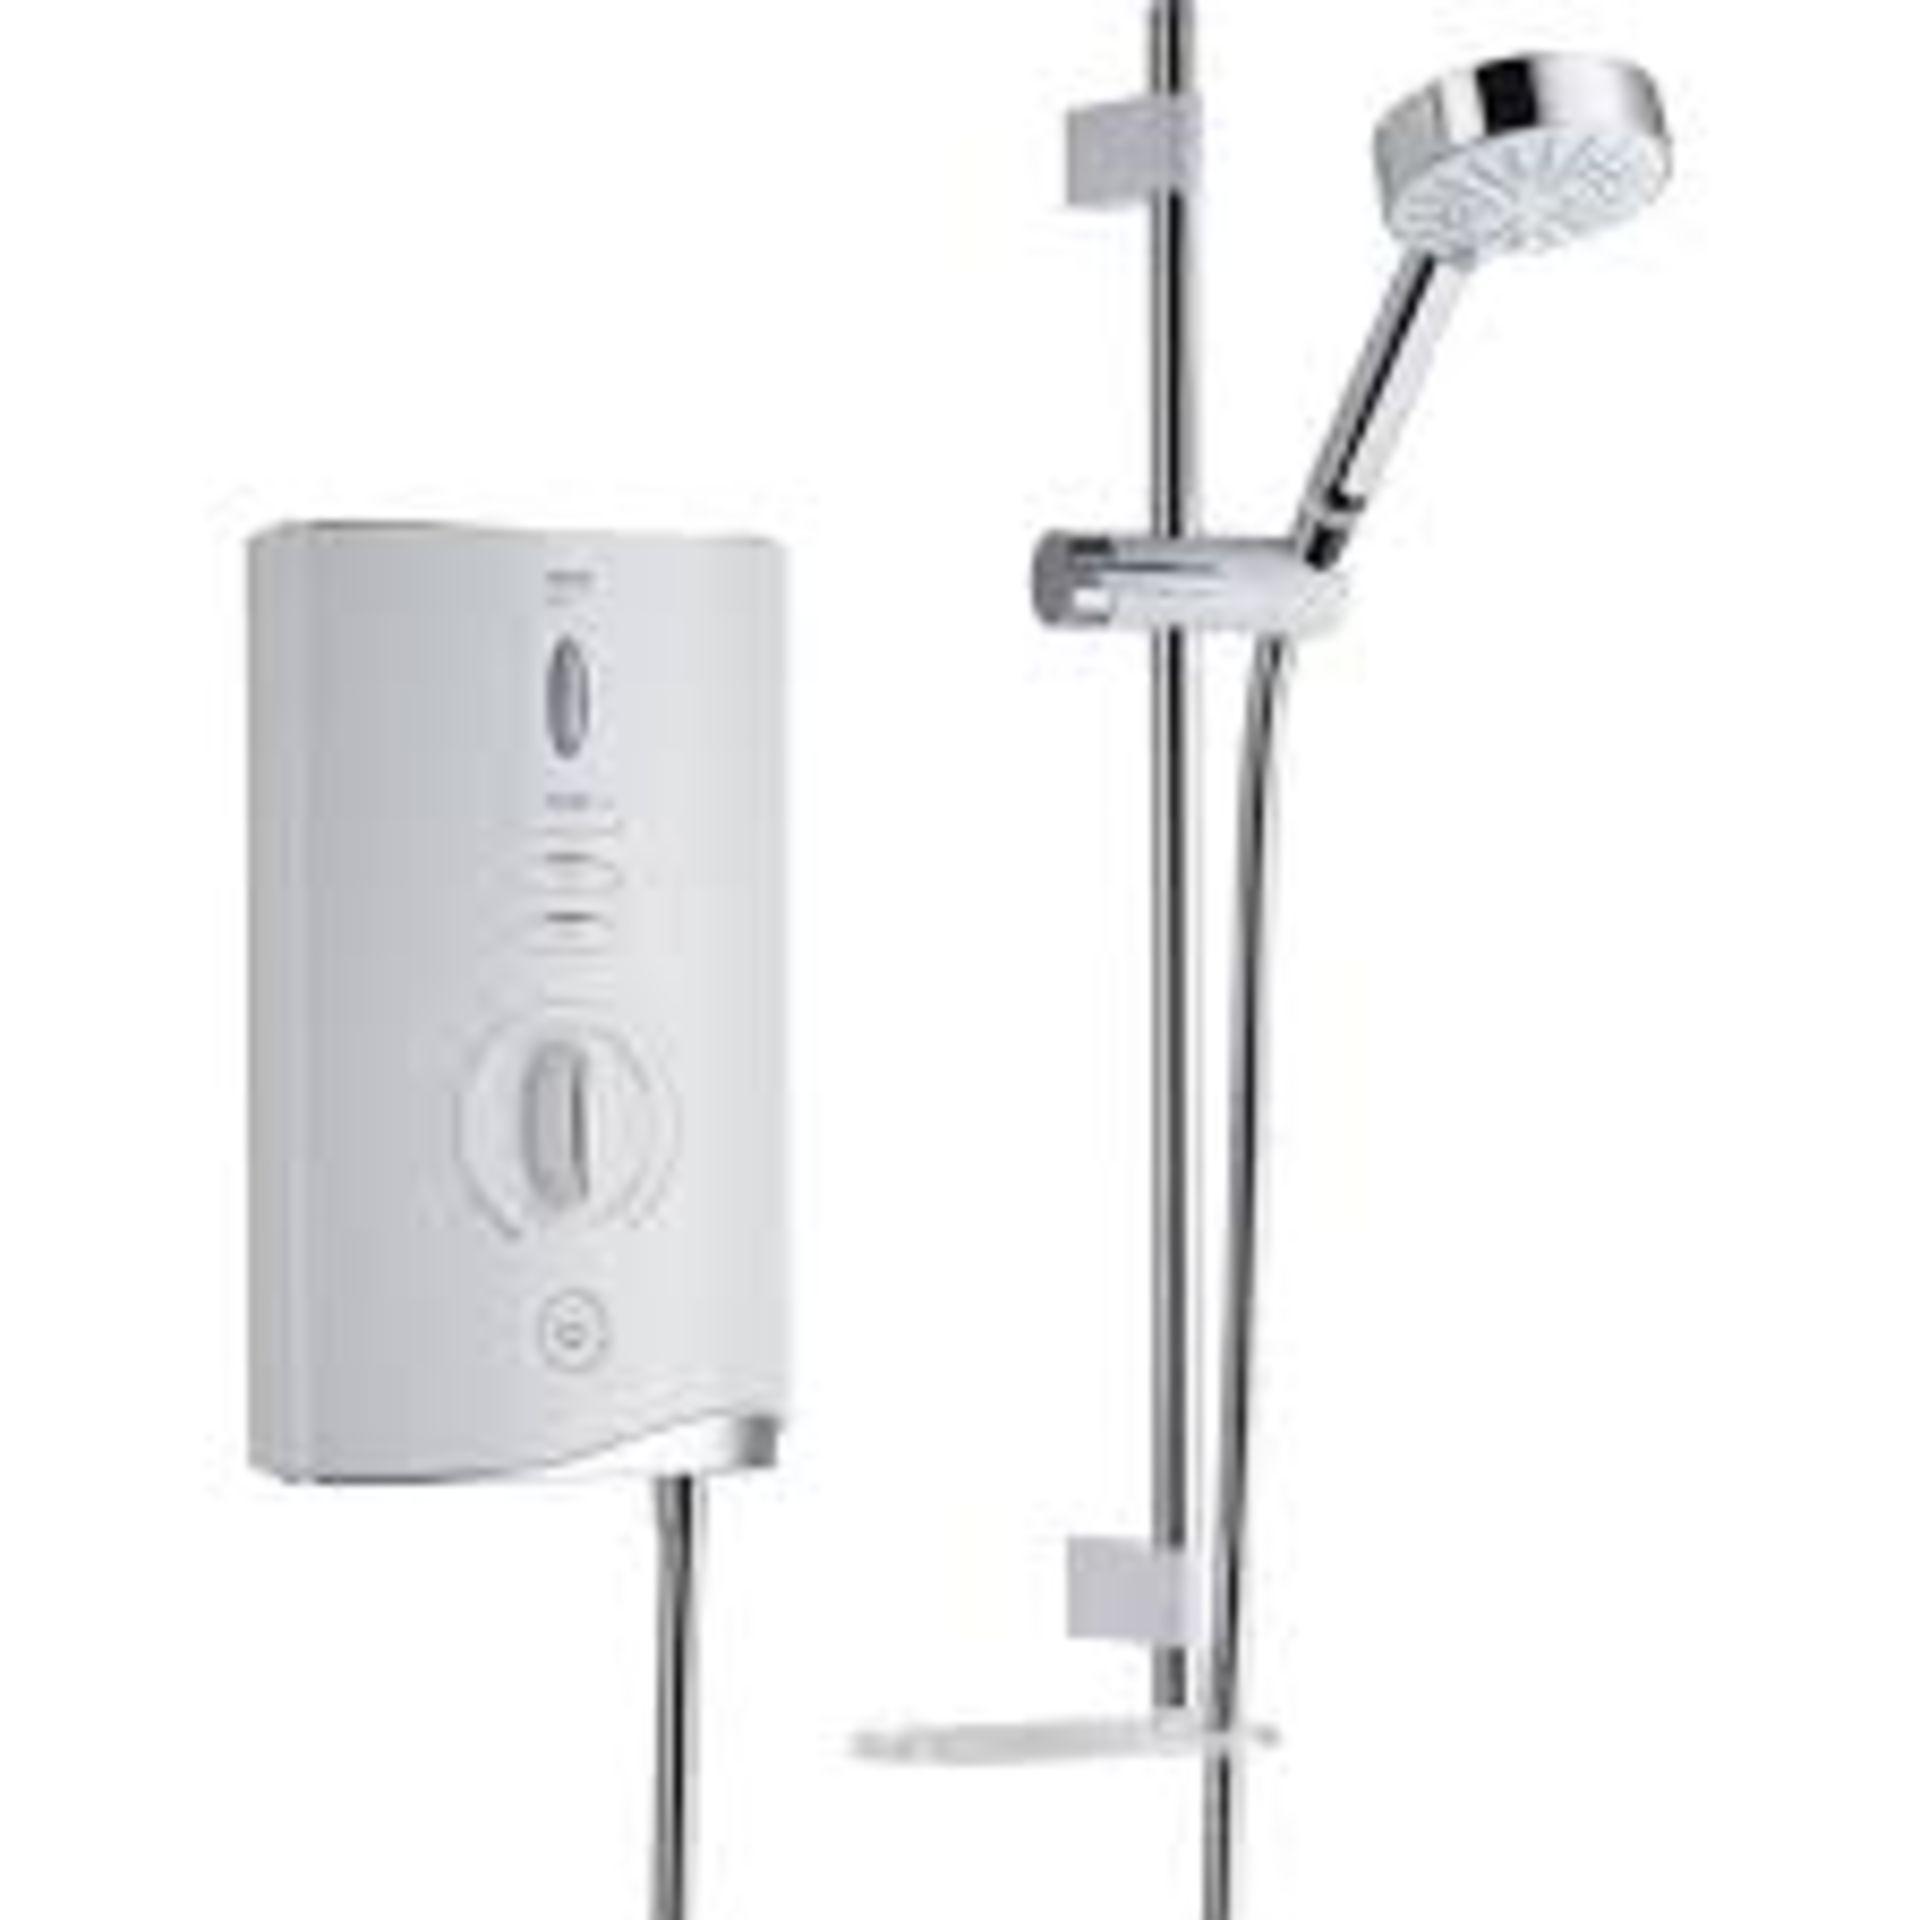 Mira Sport Max Electric Shower 10.8kW. - S2.12.